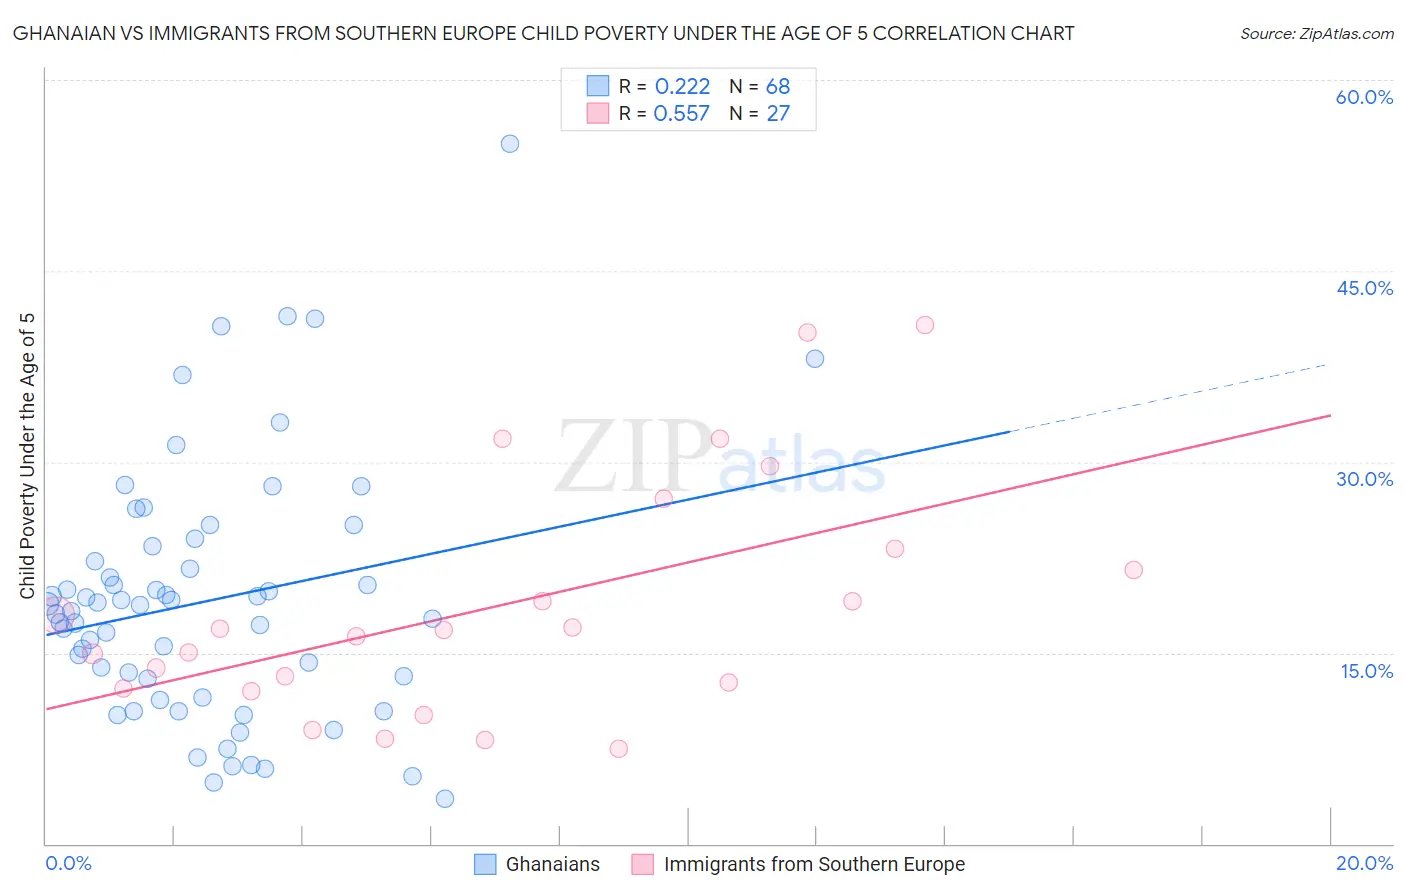 Ghanaian vs Immigrants from Southern Europe Child Poverty Under the Age of 5